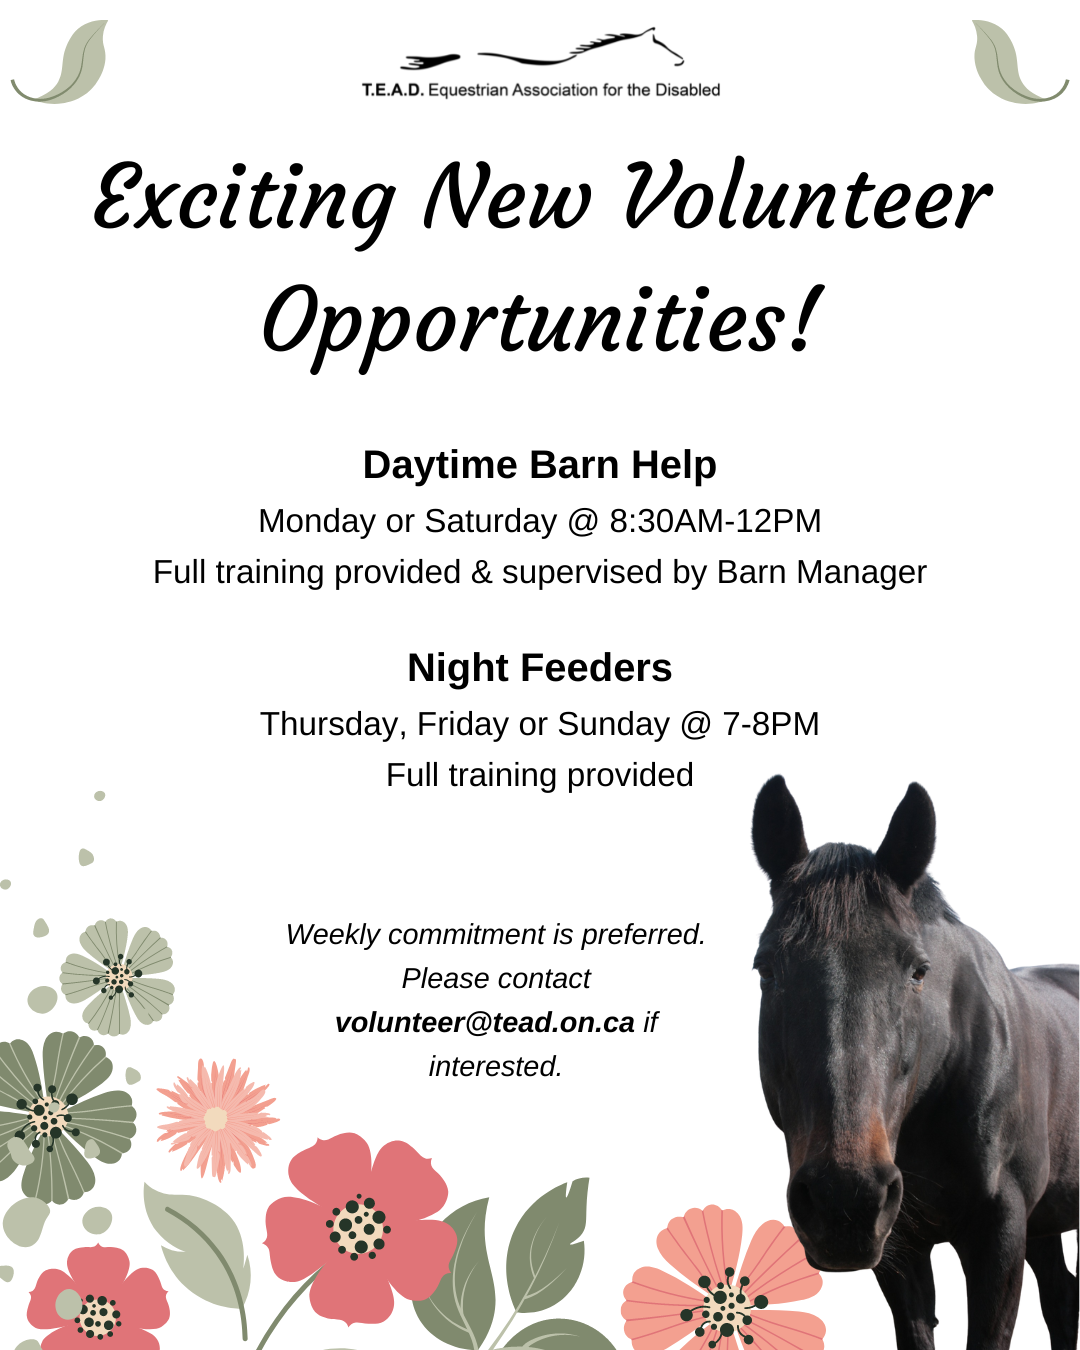 Barn volunteers needed for daily barn shifts and night feed.